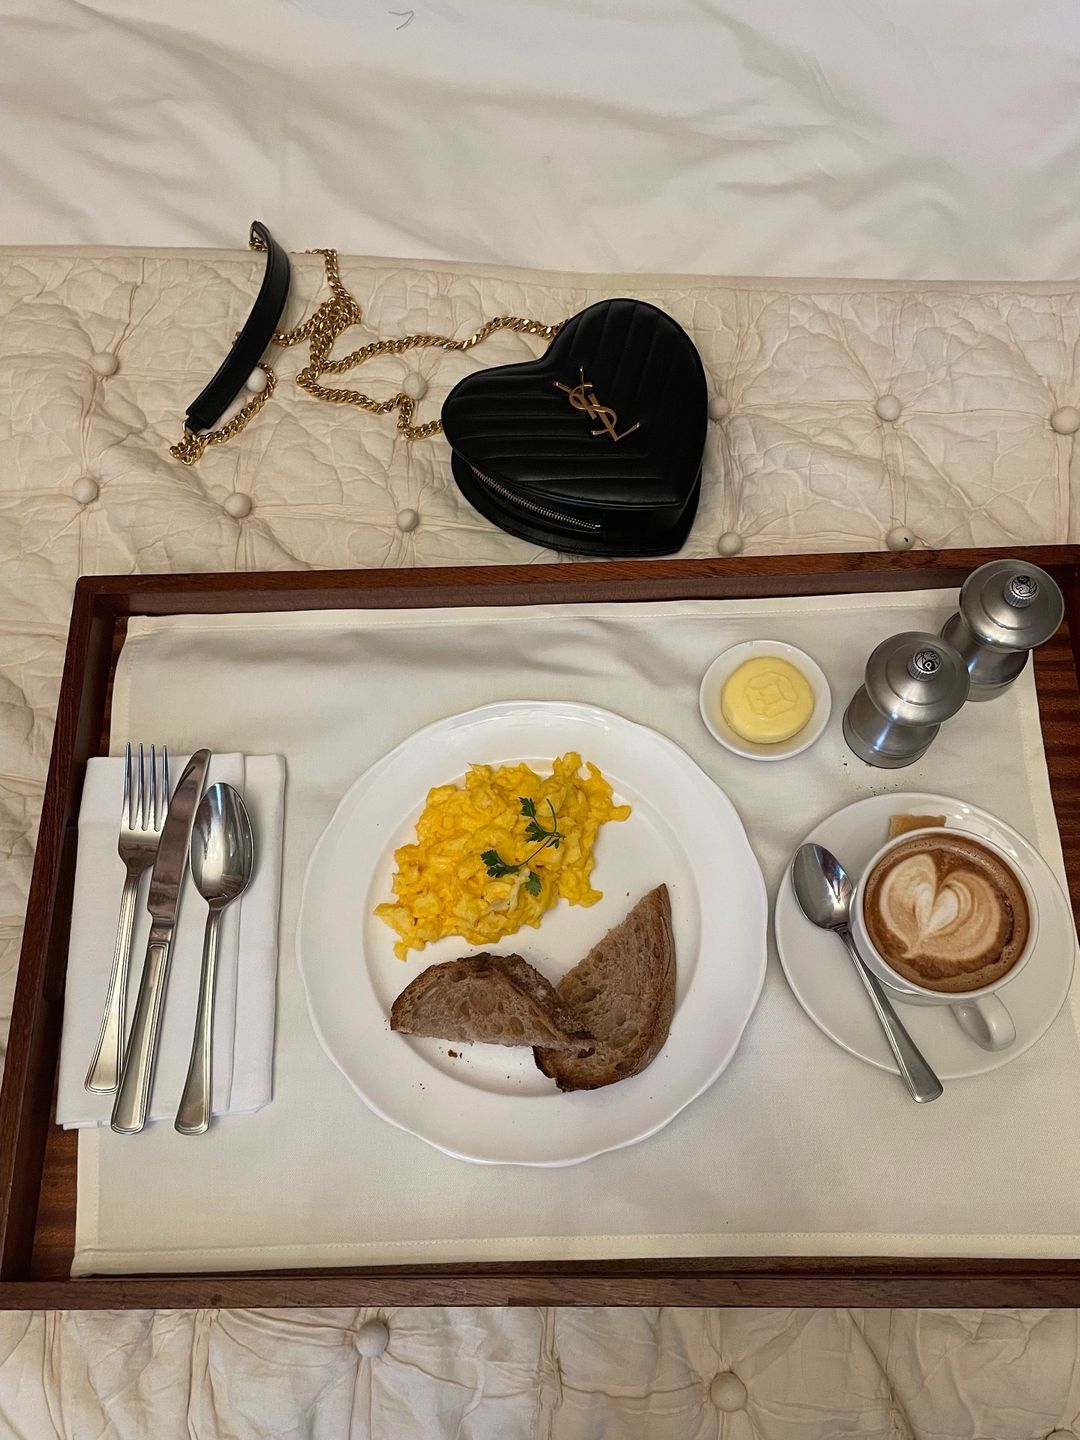 Gabriele Hackworthy shares an image of her hotel breakfast tray and coffee